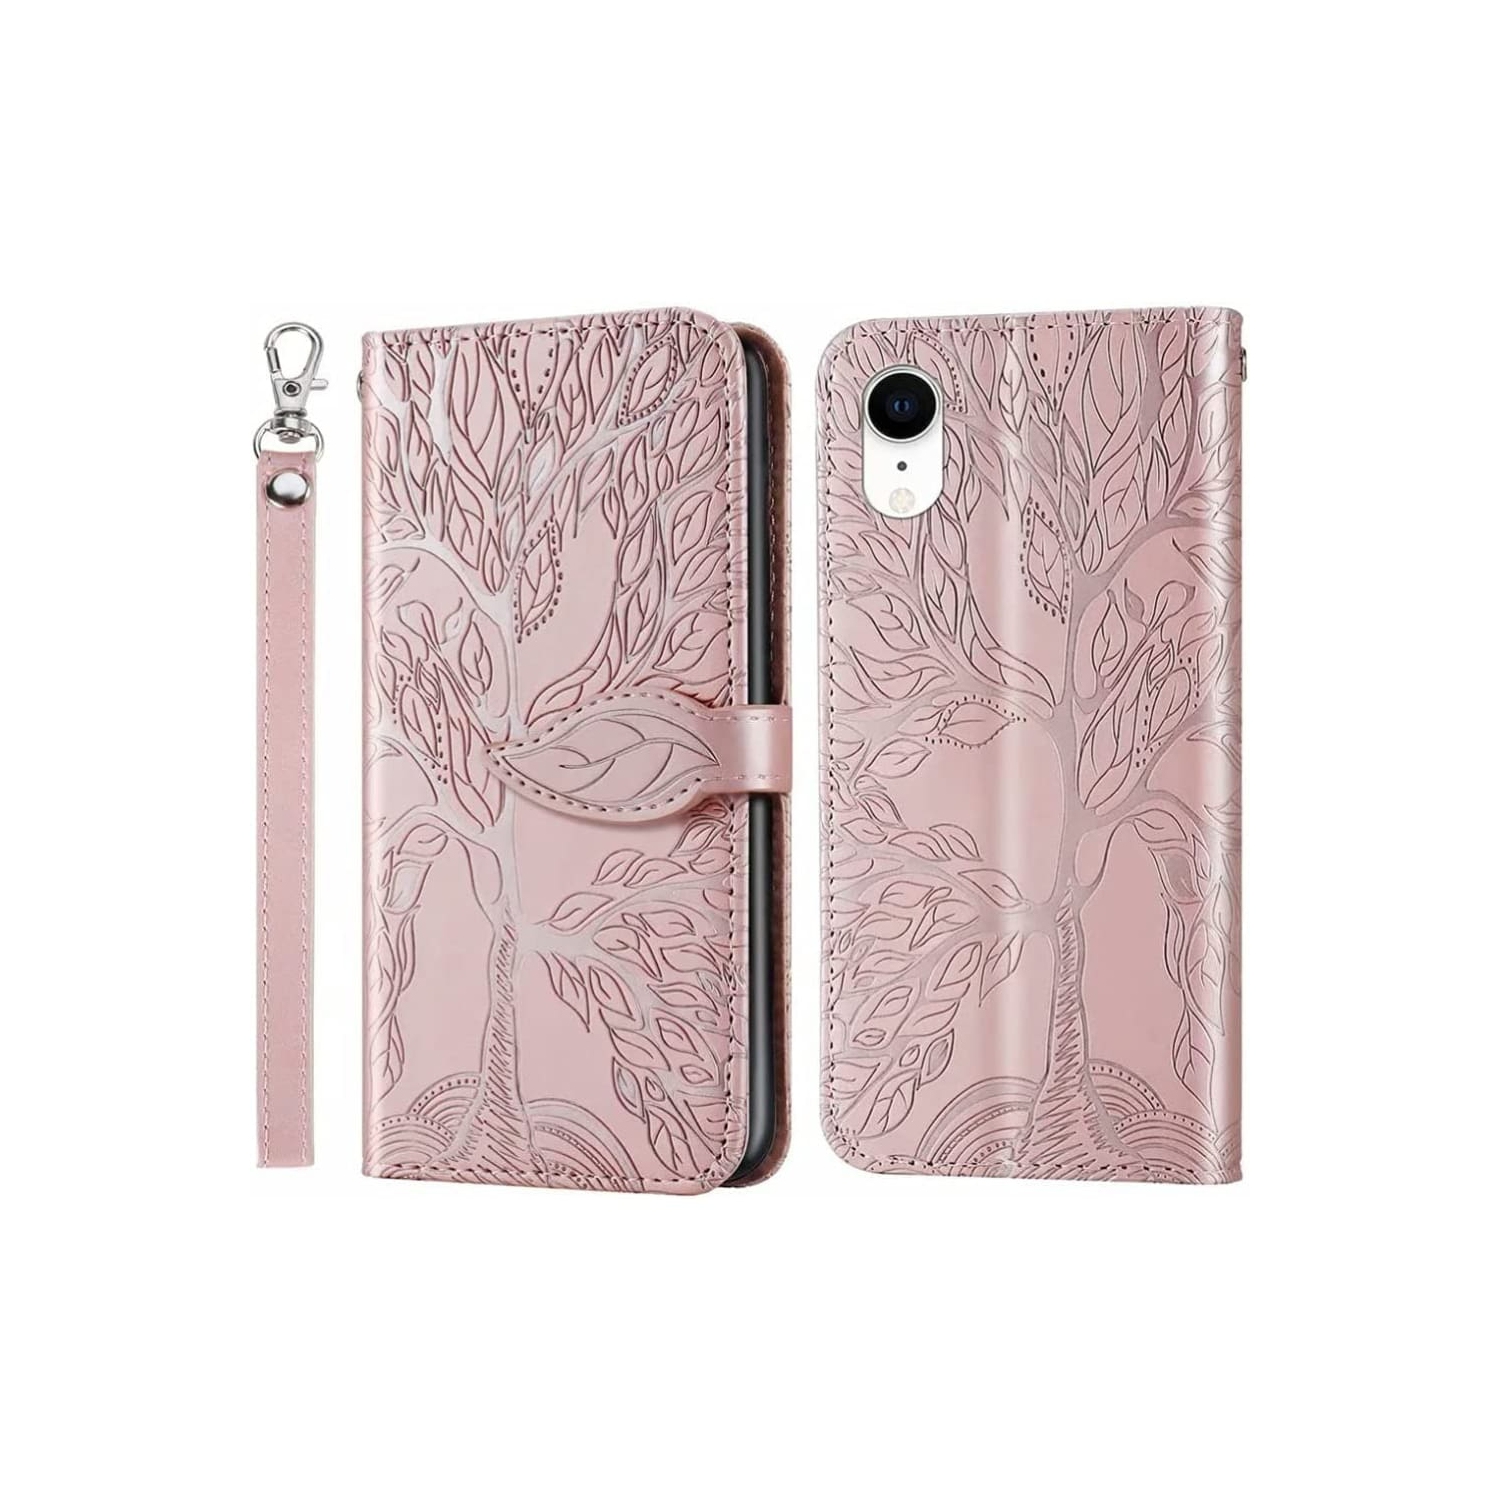 Premium PU Leather Embossed Tree Wallet Phone Case with card slots and wrist strap for iPhone XR A1984 A2105